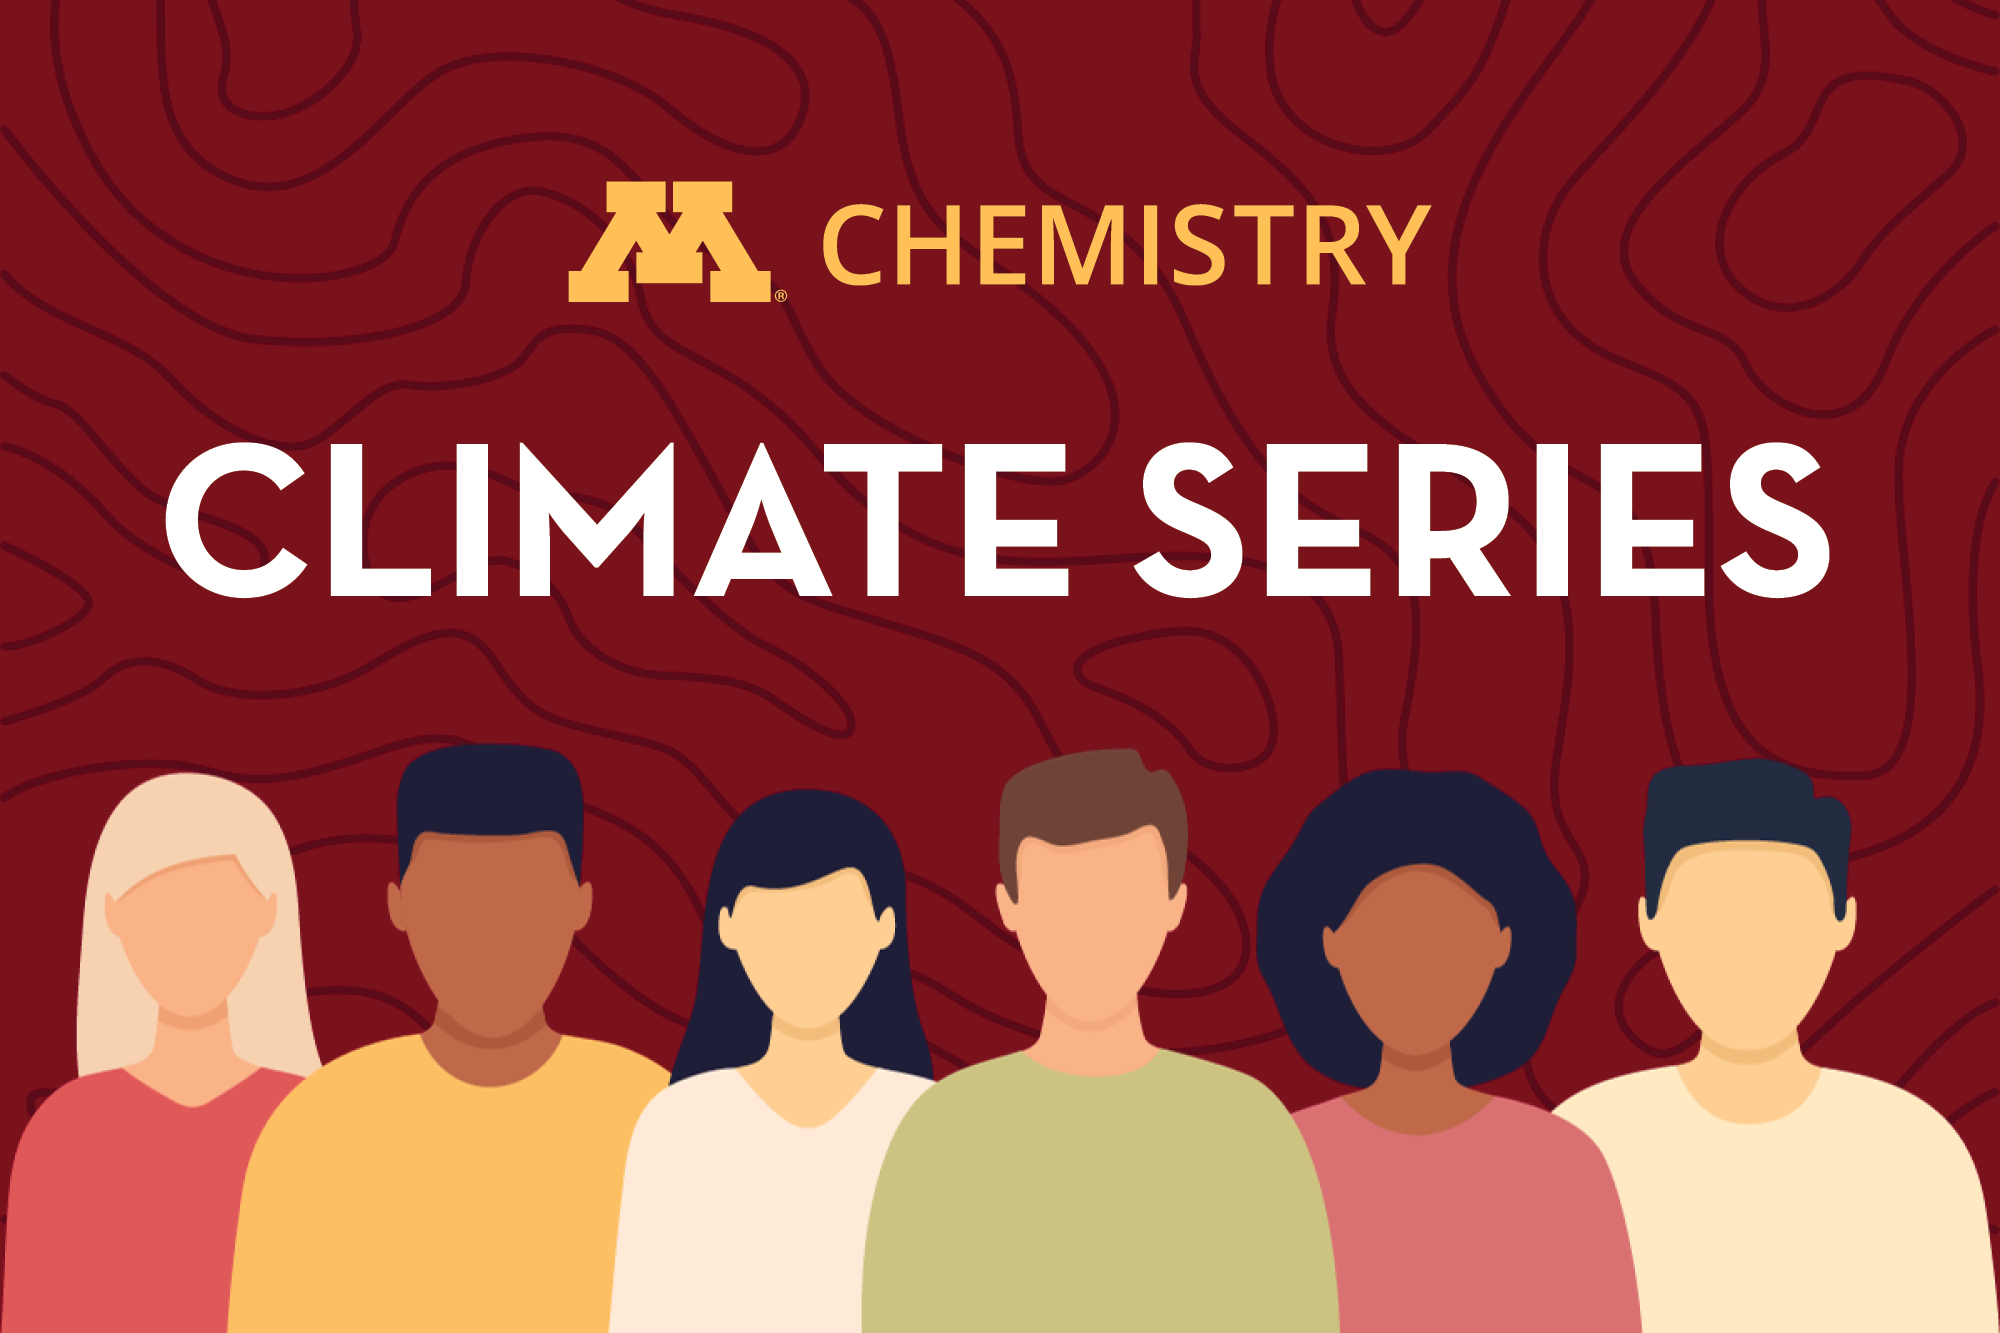 Clip art of a group of people on a maroon background with a white "Climate Series" title